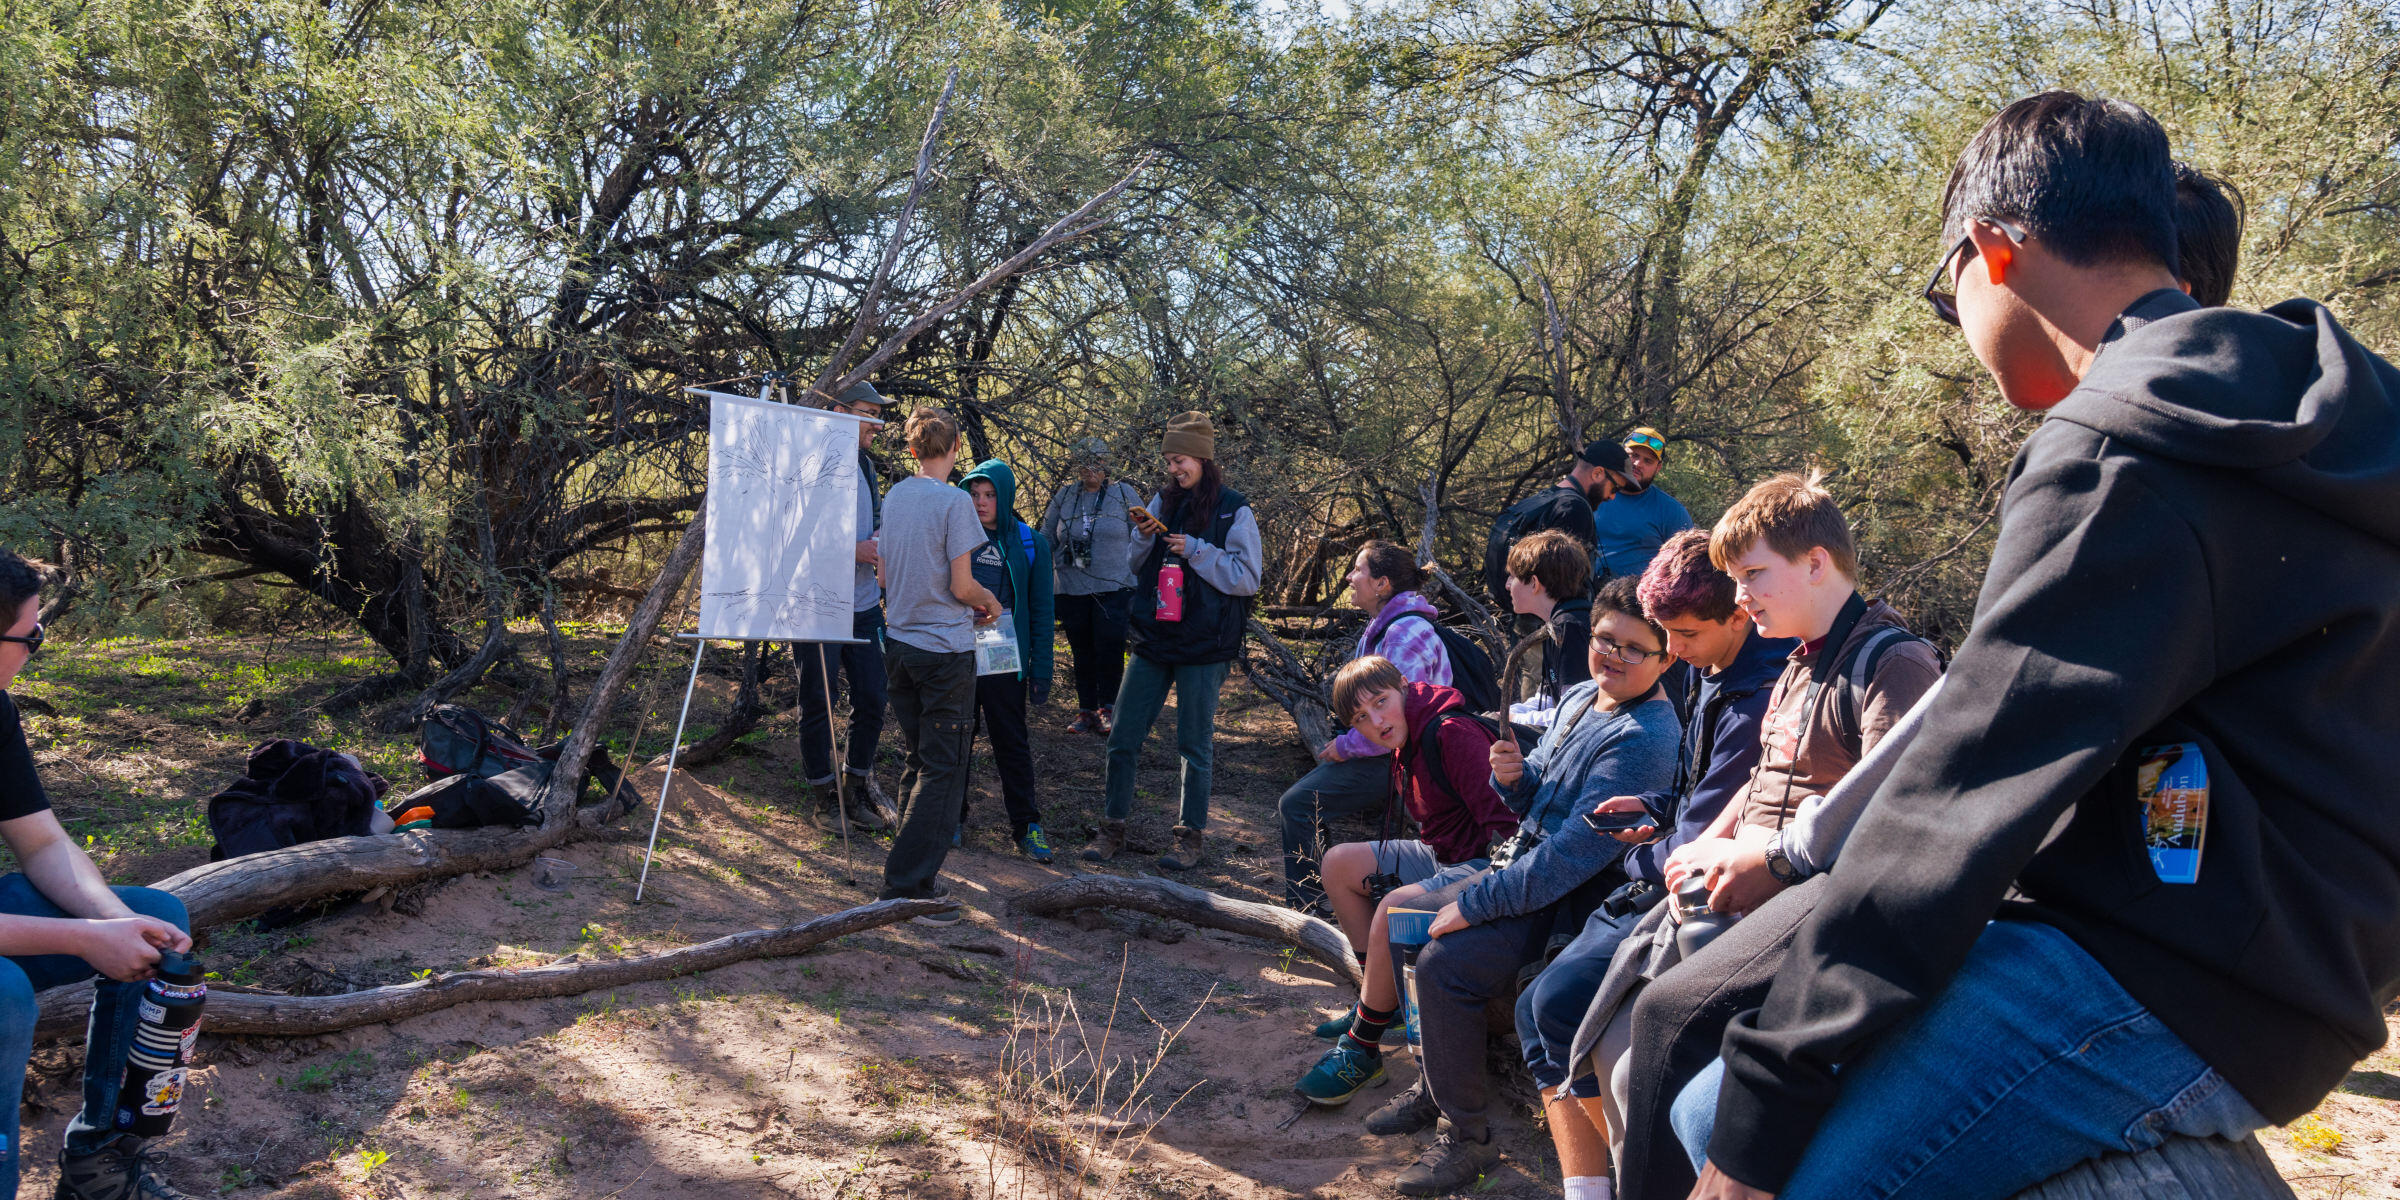 A group of high school students sit around an outdoor presentation under a canopy of mesquite trees.